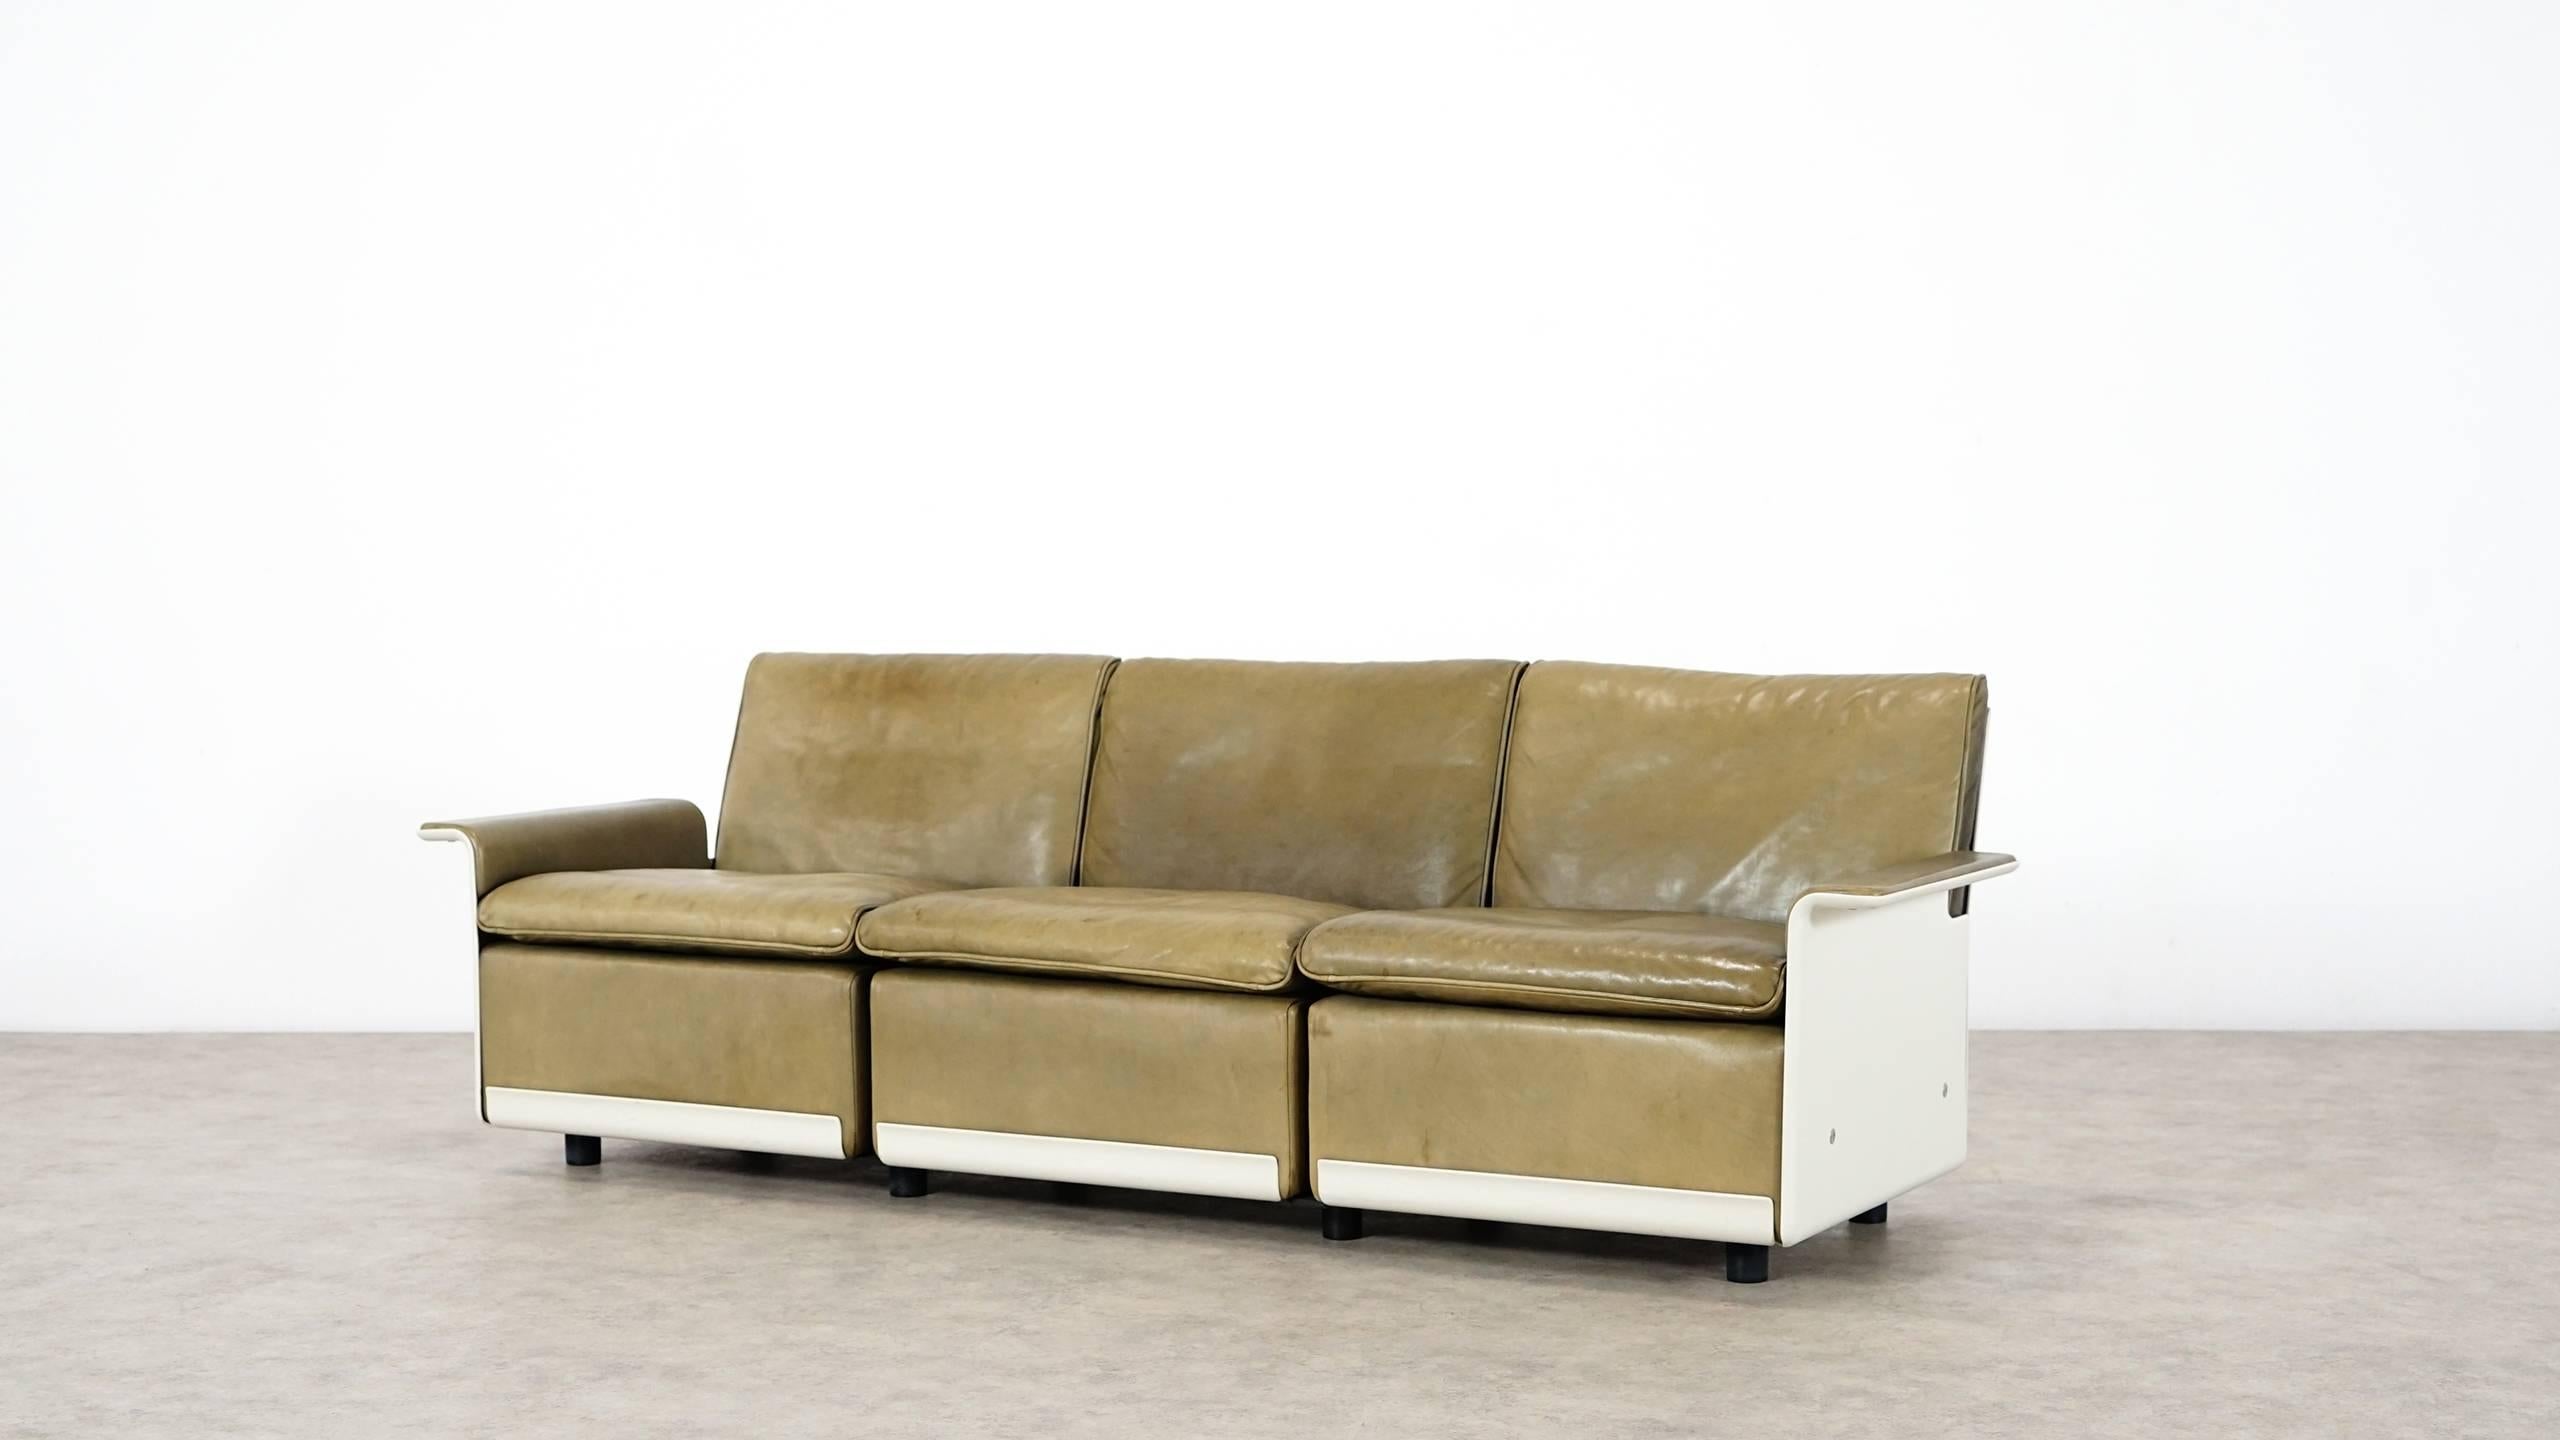 German Dieter Rams Sofa and Stool RZ 62 in Olivgreen Leather by Vitsœ, Three-Seat